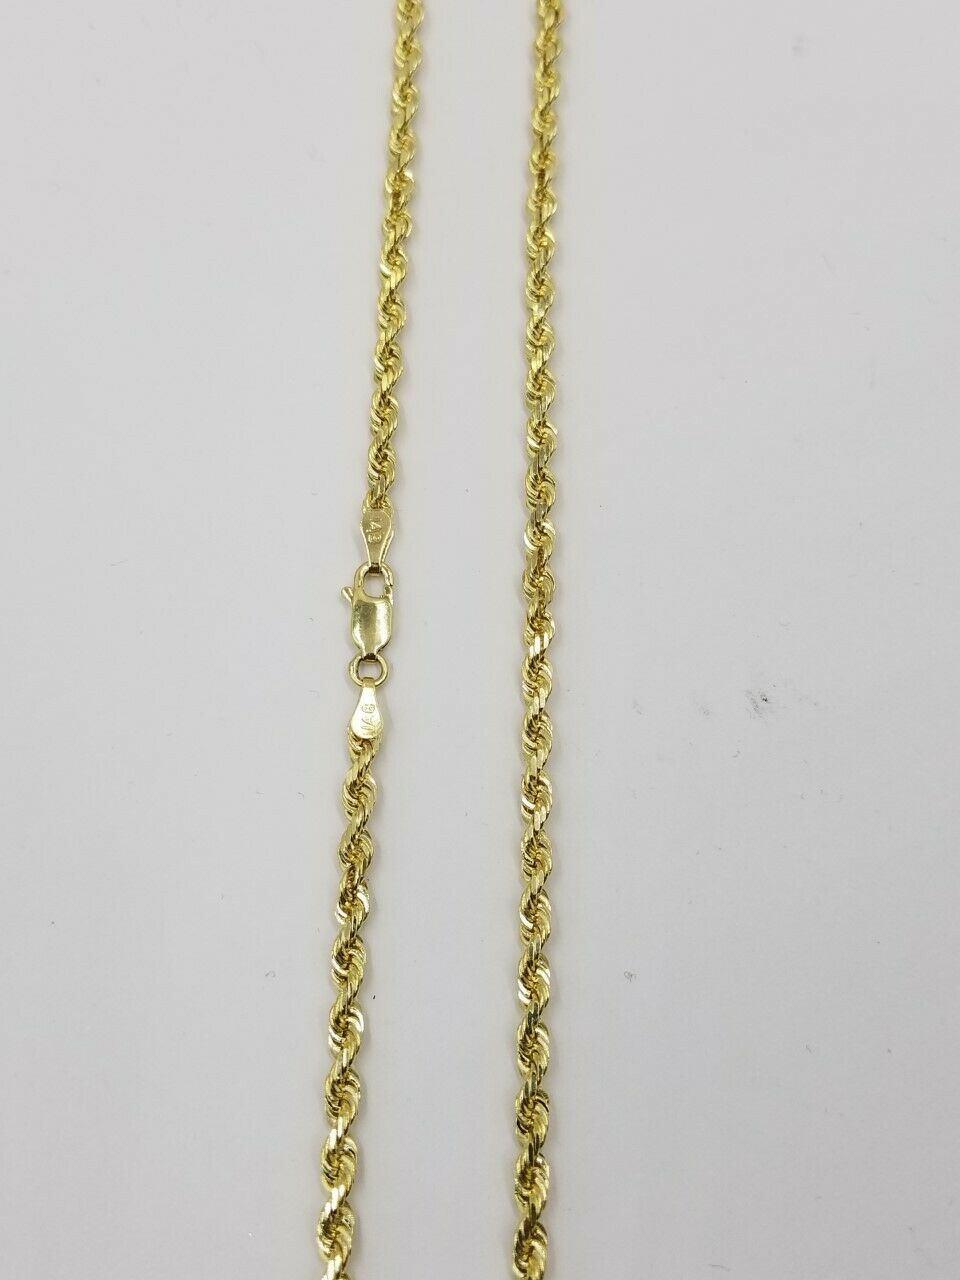 SOLID 14K YELLOW GOLD TWISTED ROPE CHAIN BRACELET 3mm MENS LADIES